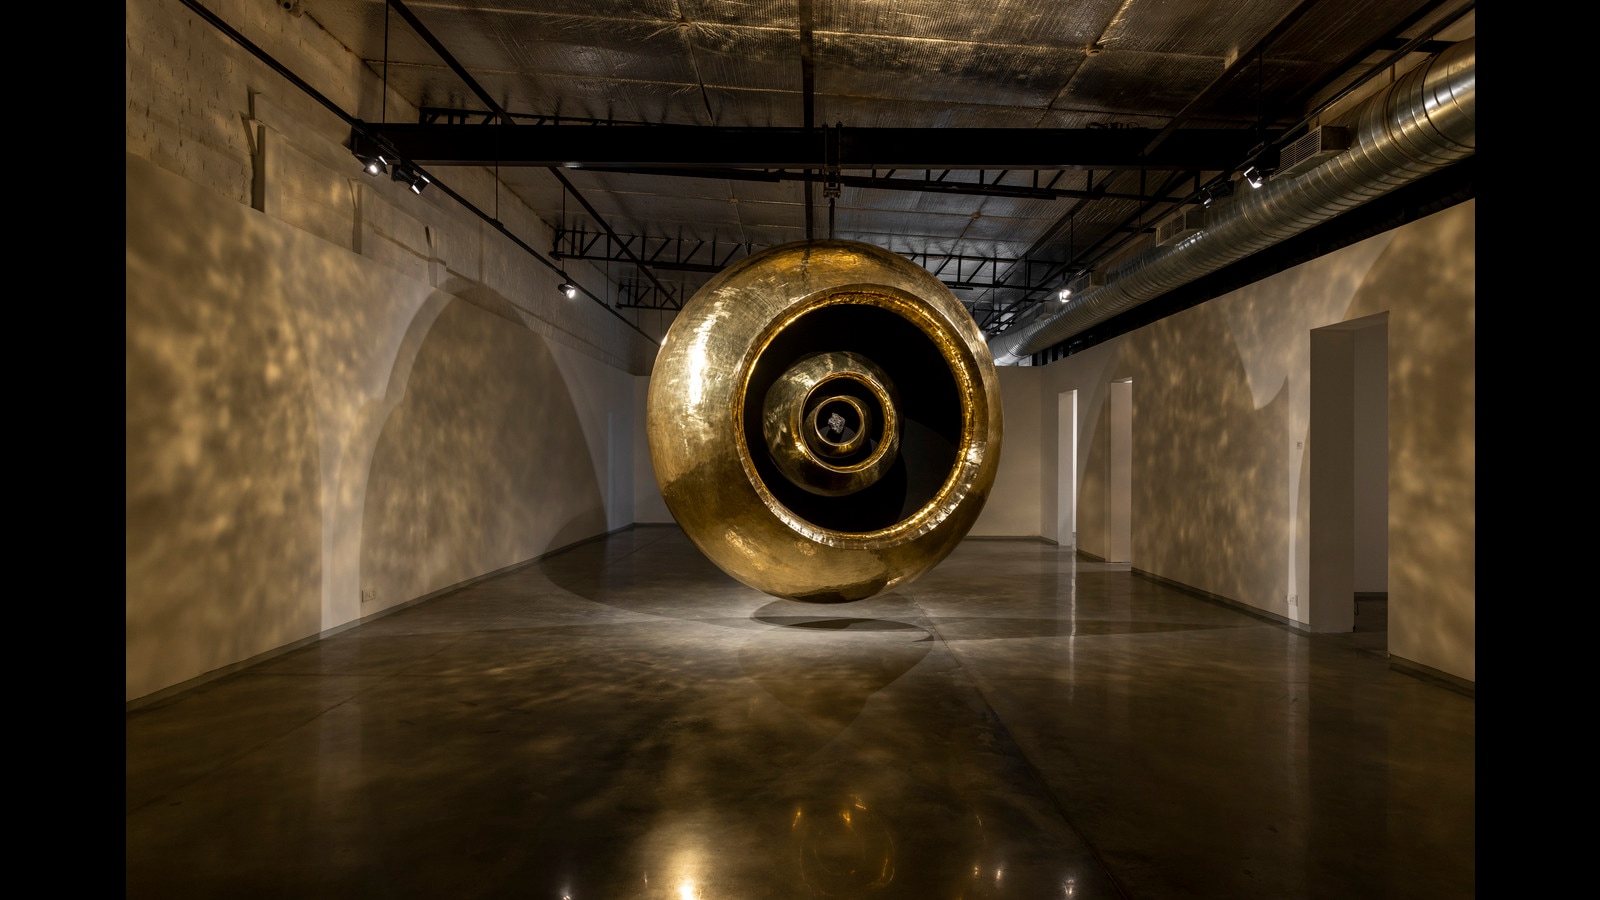 Artist Subodh Gupta’s cosmic quest is steeped in the past